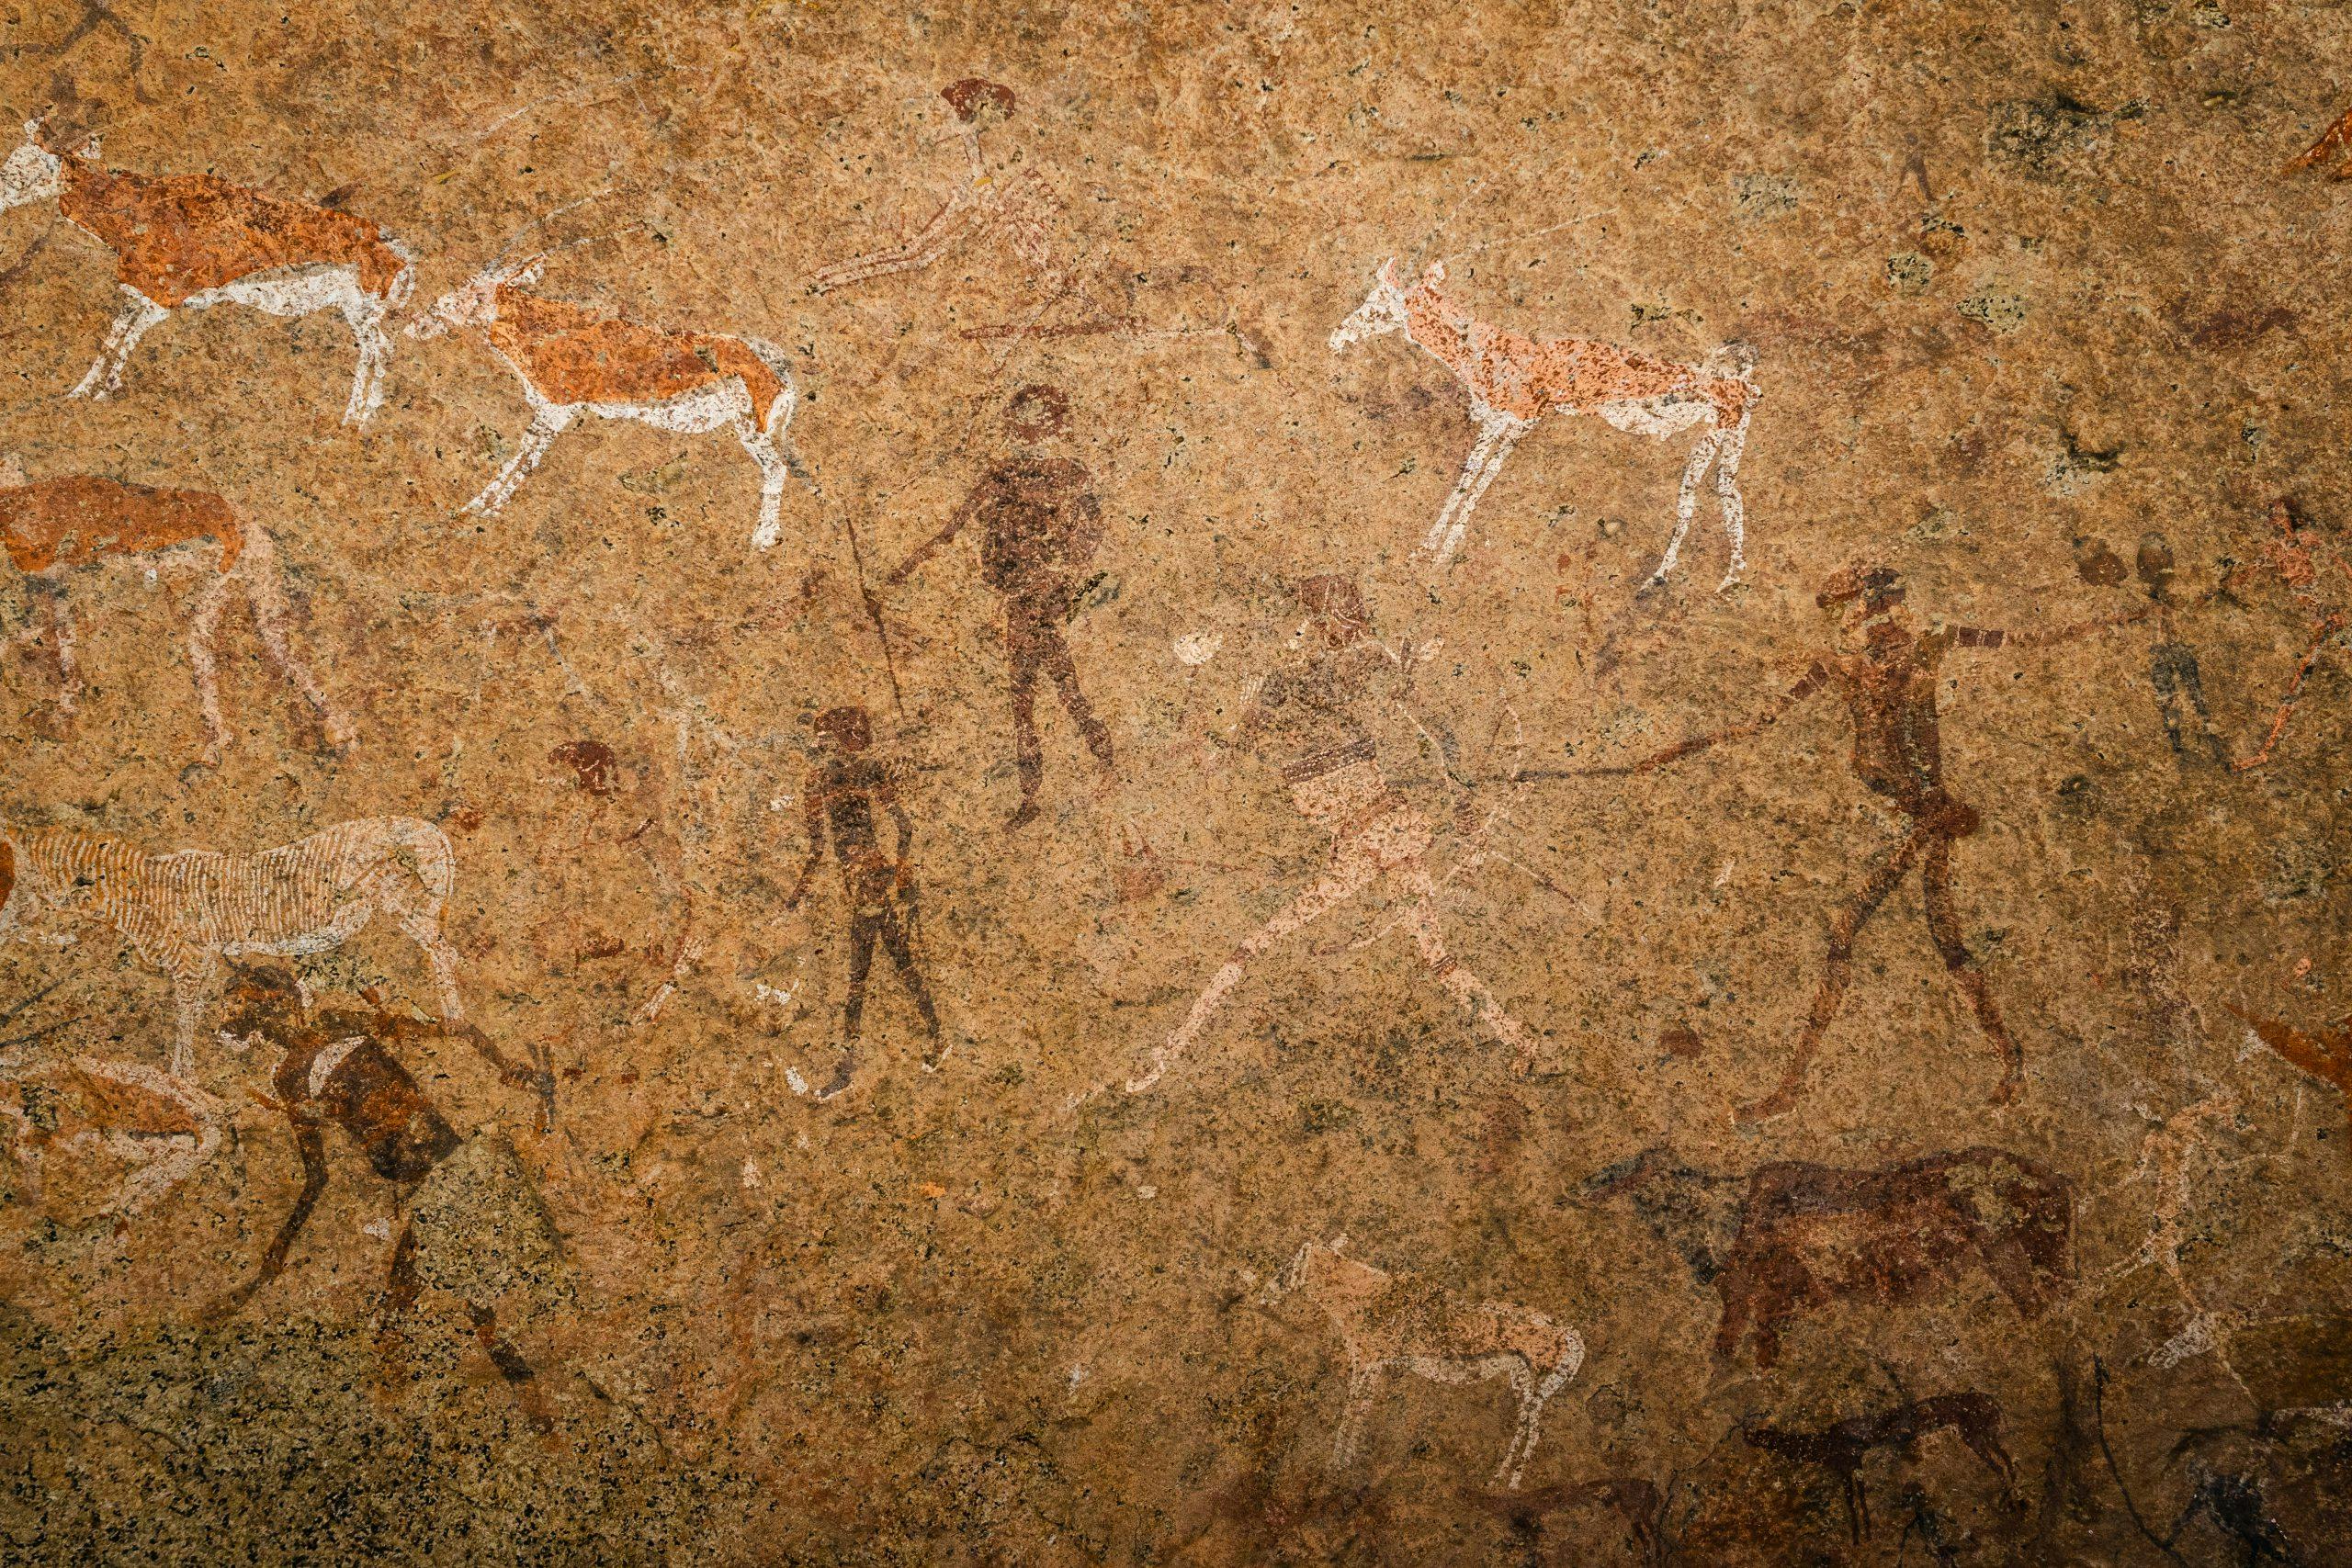 ancient drawings of human figures hunting